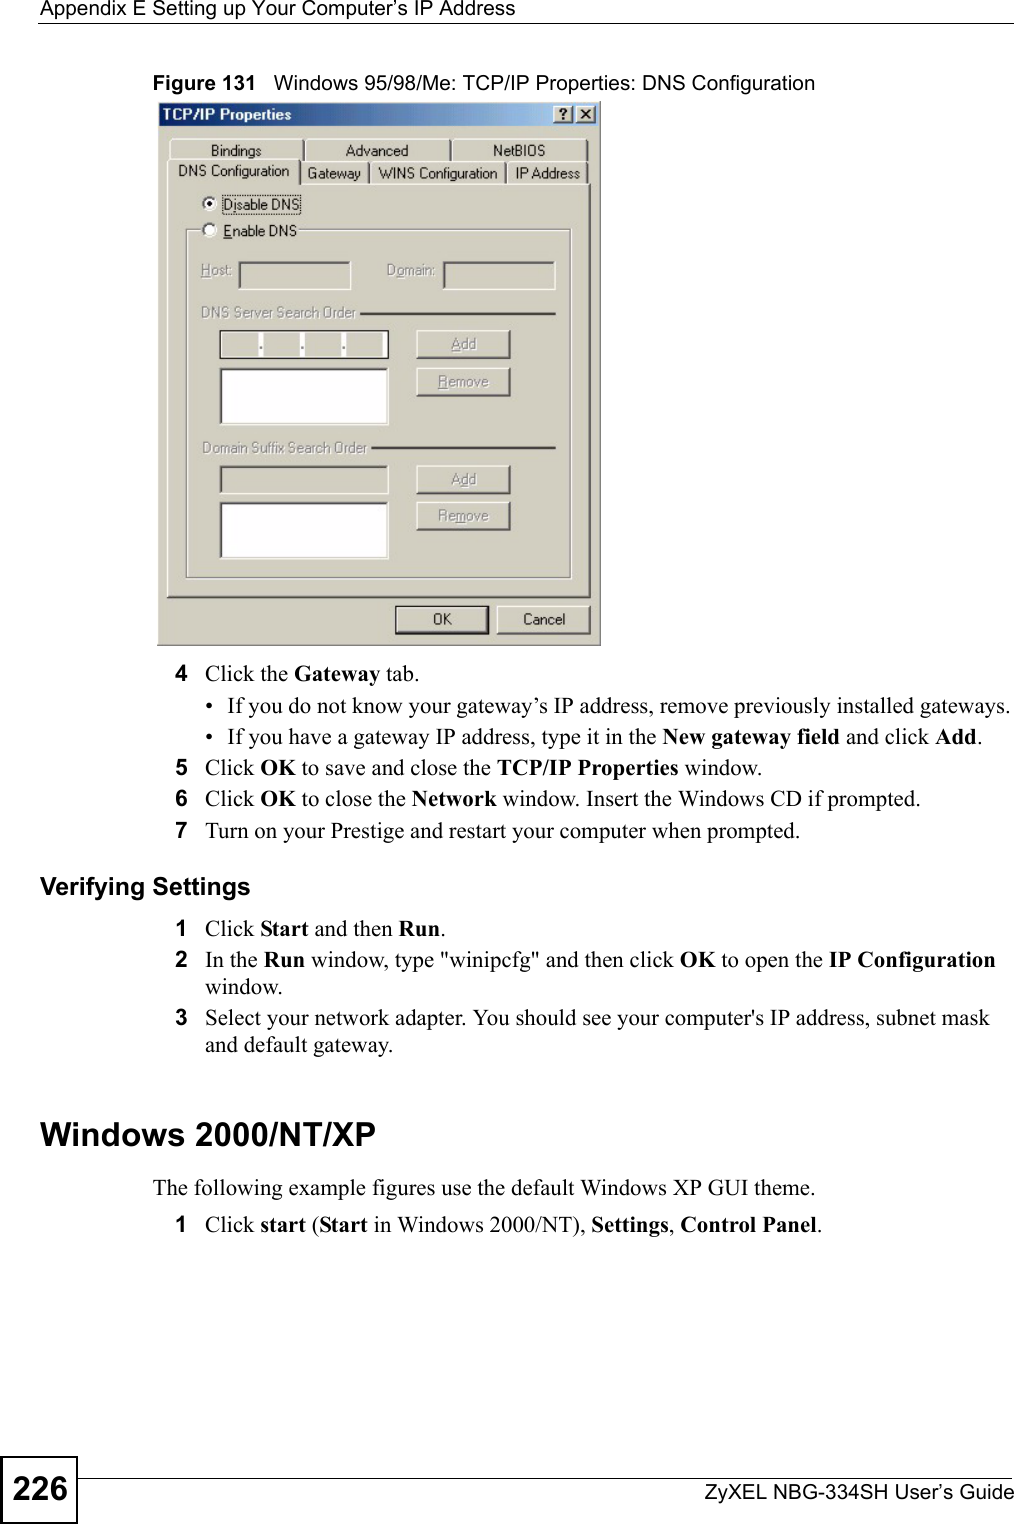 Appendix E Setting up Your Computer’s IP AddressZyXEL NBG-334SH User’s Guide226Figure 131   Windows 95/98/Me: TCP/IP Properties: DNS Configuration4Click the Gateway tab.• If you do not know your gateway’s IP address, remove previously installed gateways.• If you have a gateway IP address, type it in the New gateway field and click Add.5Click OK to save and close the TCP/IP Properties window.6Click OK to close the Network window. Insert the Windows CD if prompted.7Turn on your Prestige and restart your computer when prompted.Verifying Settings1Click Start and then Run.2In the Run window, type &quot;winipcfg&quot; and then click OK to open the IP Configuration window.3Select your network adapter. You should see your computer&apos;s IP address, subnet mask and default gateway.Windows 2000/NT/XPThe following example figures use the default Windows XP GUI theme.1Click start (Start in Windows 2000/NT), Settings, Control Panel.